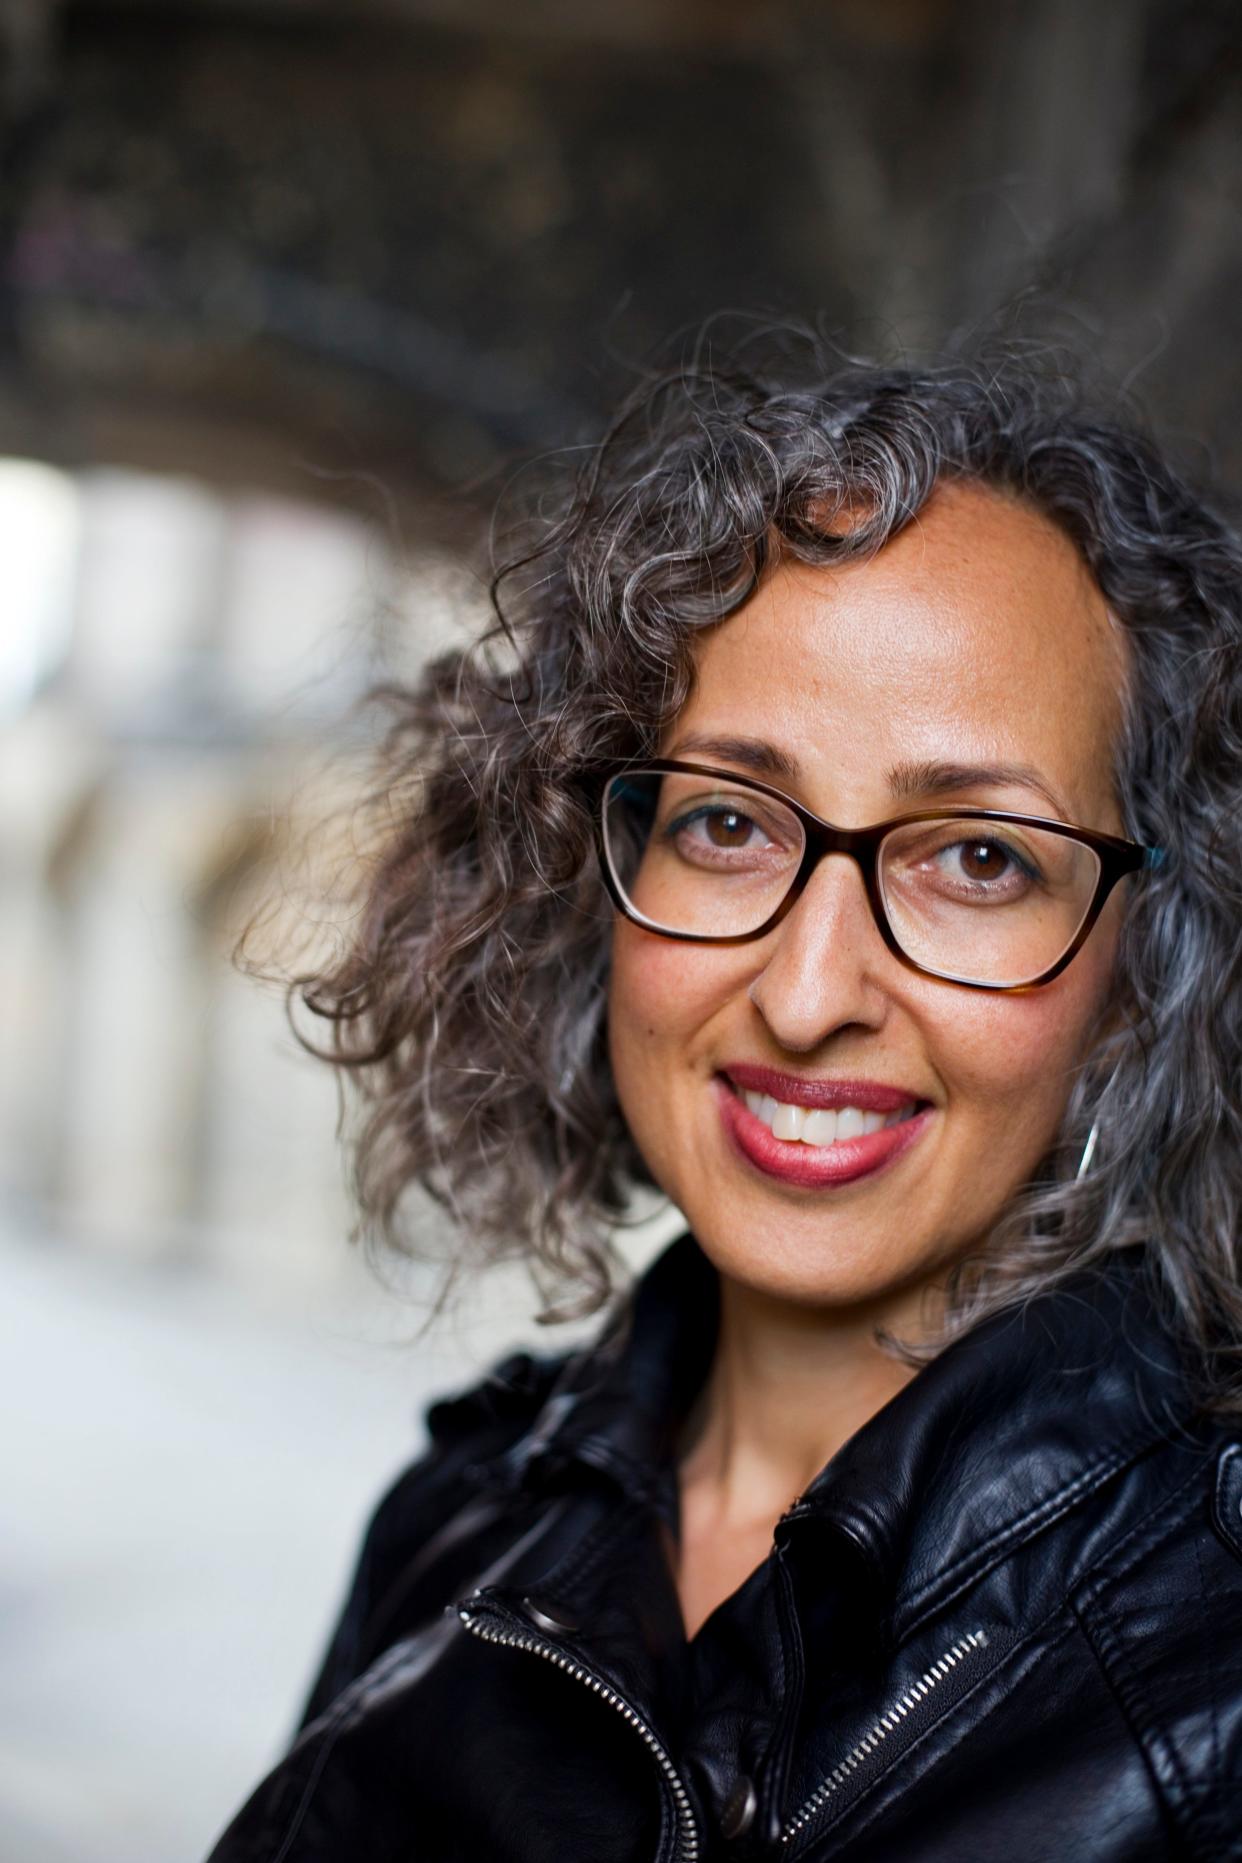 Goshen native Sofia Samatar gives a reading 7 p.m. Nov. 15, 2023, at the St. Joseph County Public Library, 304 S. Main St. She also appears at 2 p.m. Nov. 14 in conversation with Johannes Göransson on the second floor of the University of Notre Dame’s Hammes Bookstore.